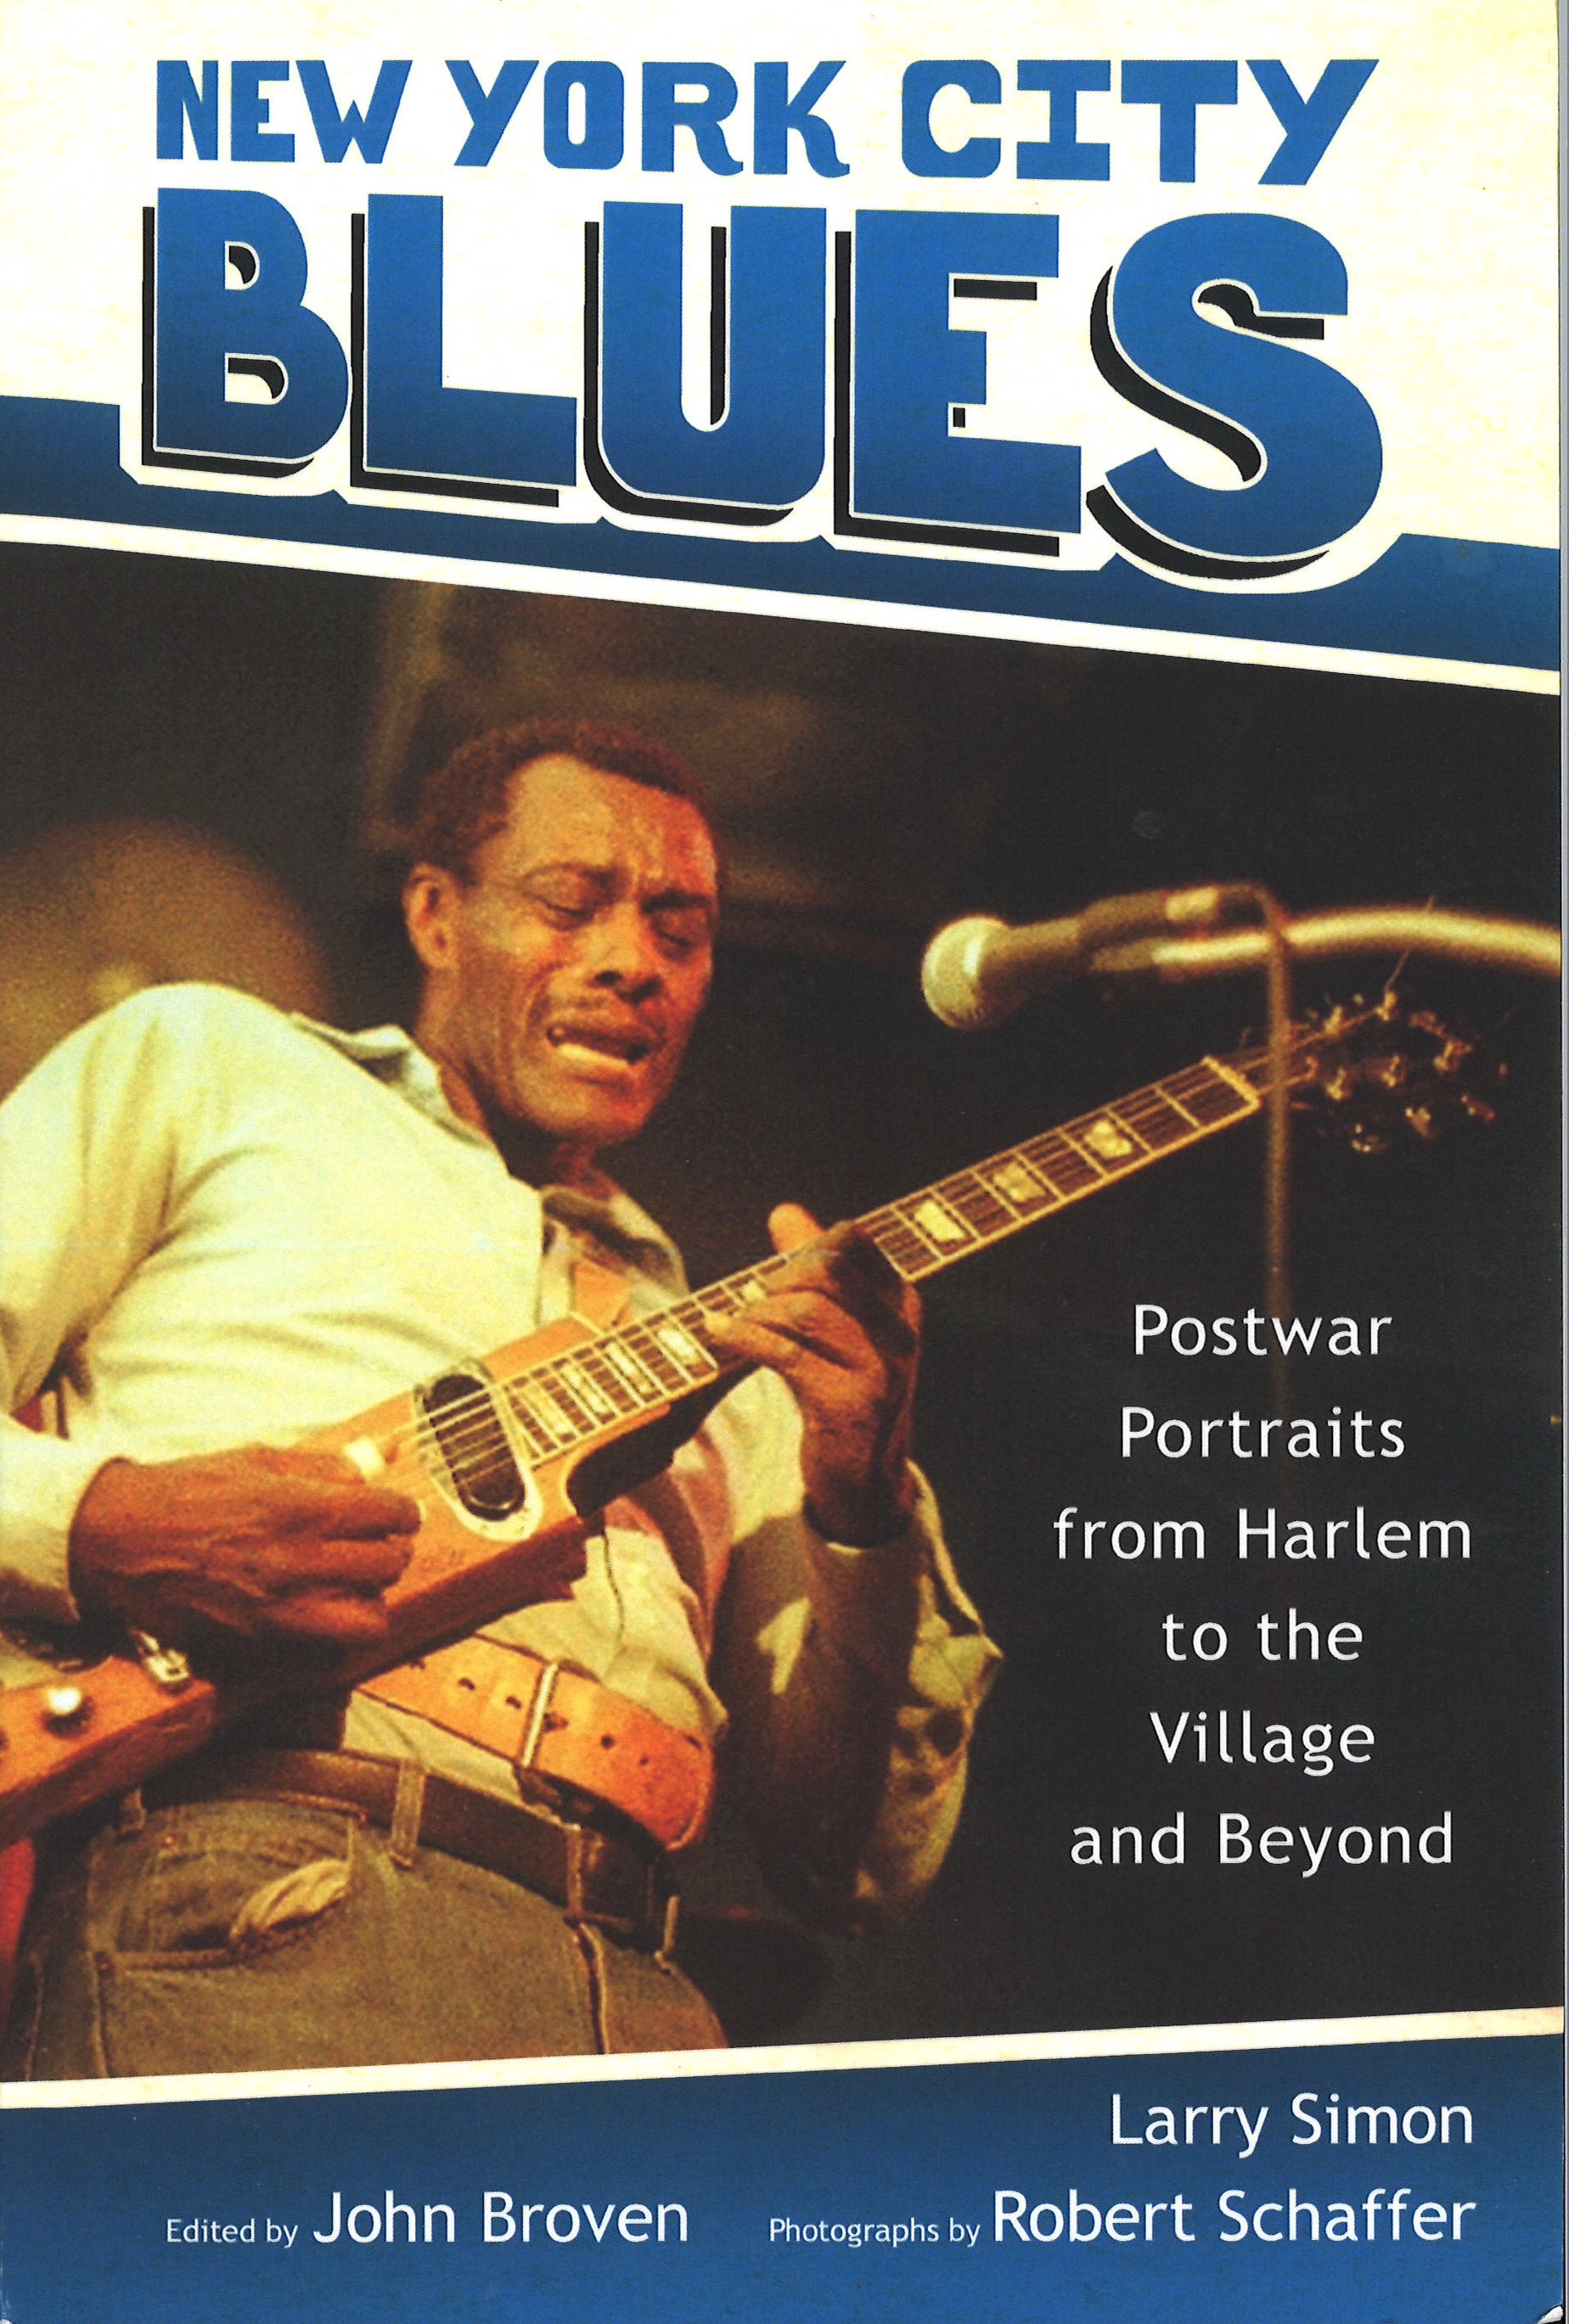 New York City Blues: Postwar Portraits from Harlem to the Village and Beyond